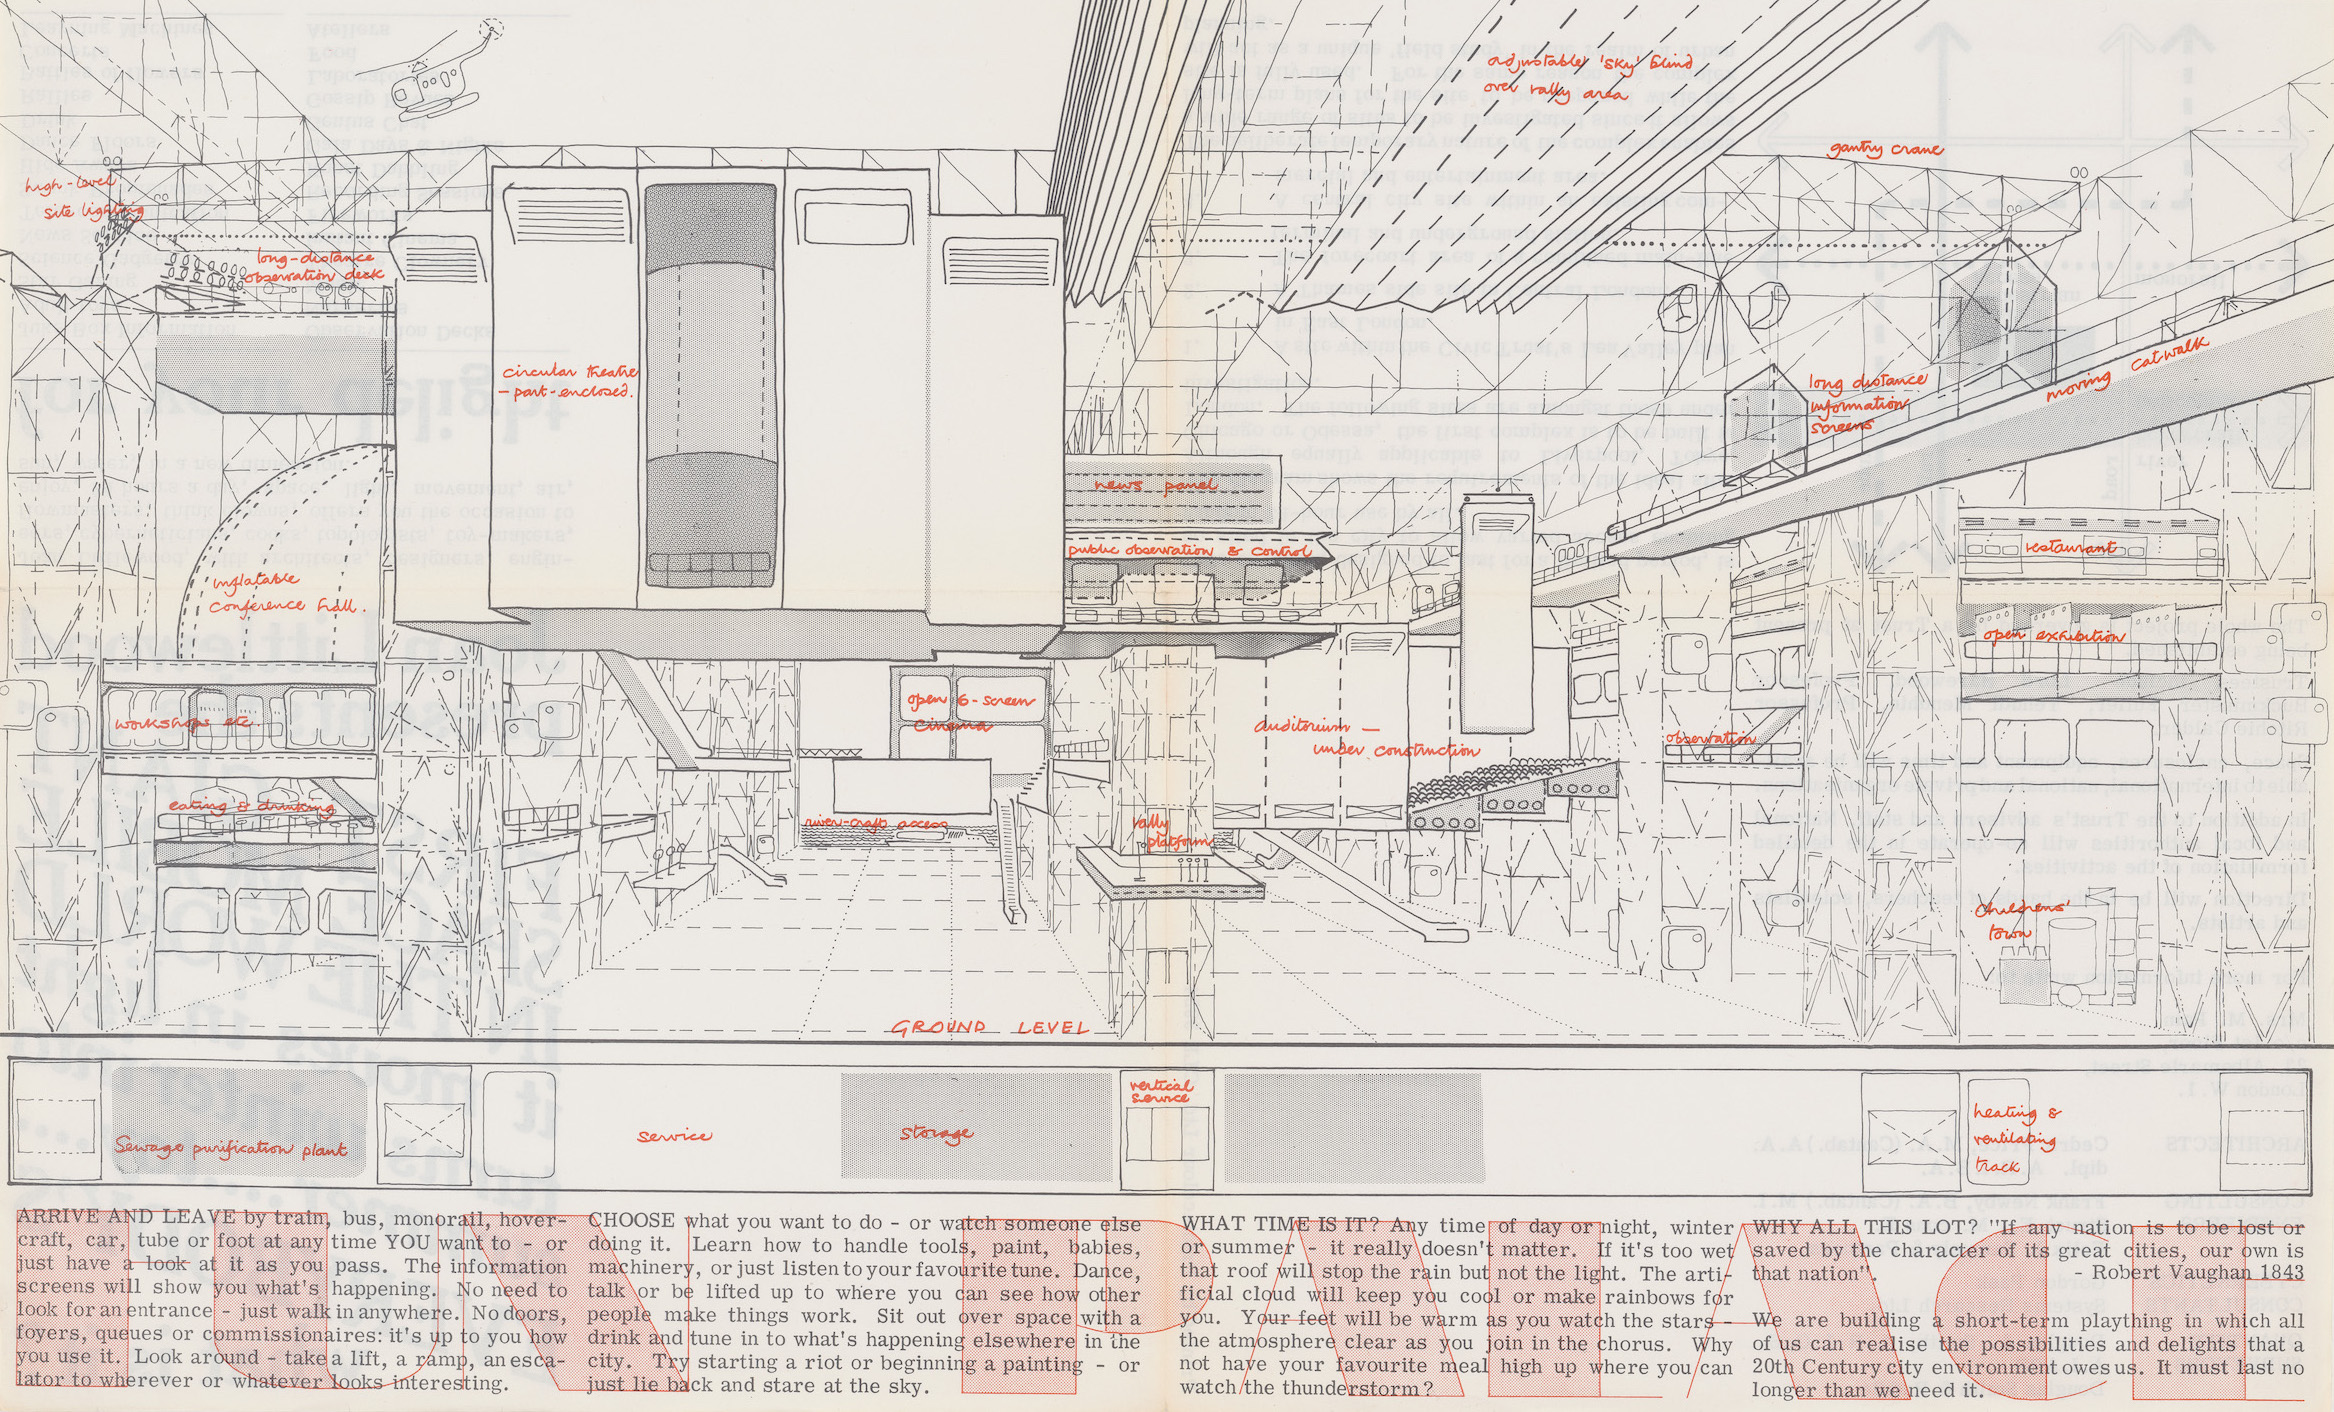 marked up architectural sketch of Cedric Price's Fun Palace with typed notes at the bottom